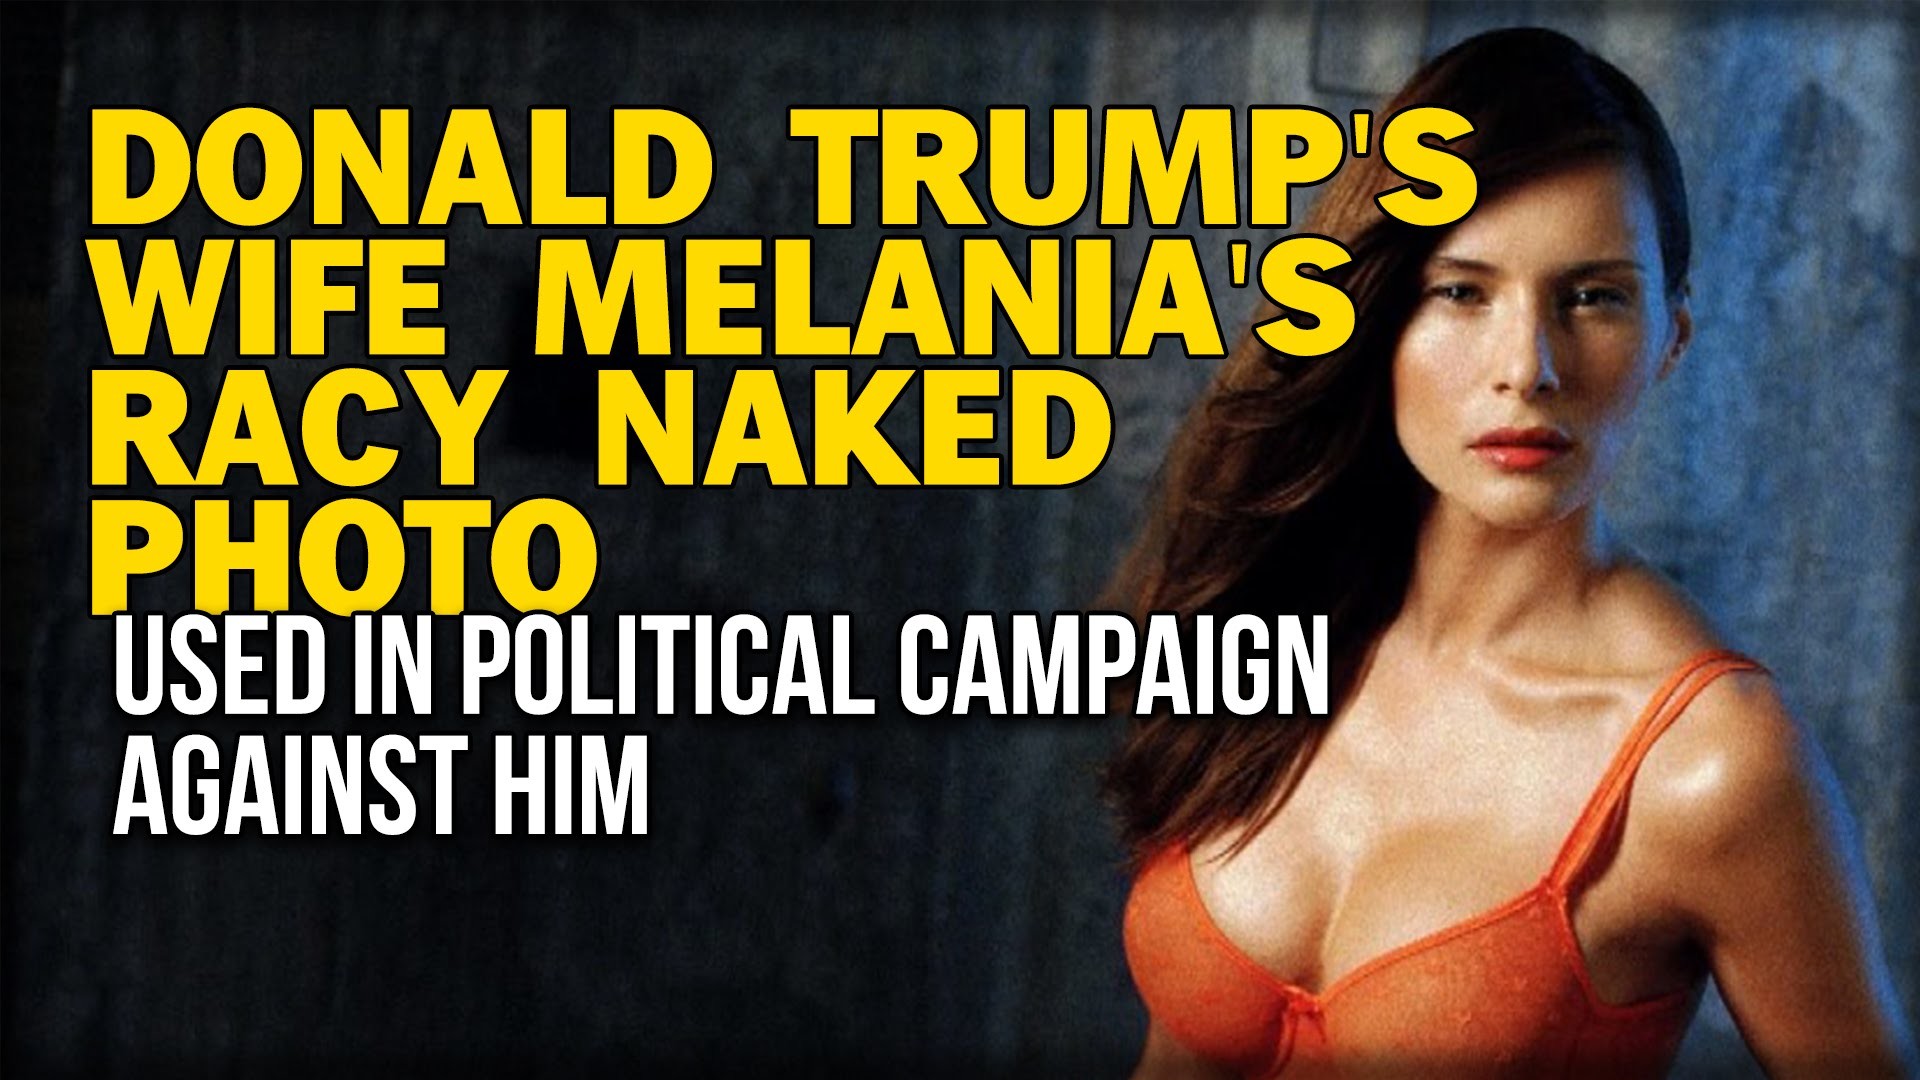 1920x1080 DONALD TRUMP'S WIFE MELANIA'S RACY NAKED PHOTO USED IN POLITICAL CAMPAIGN  AGAINST HIM - YouTube